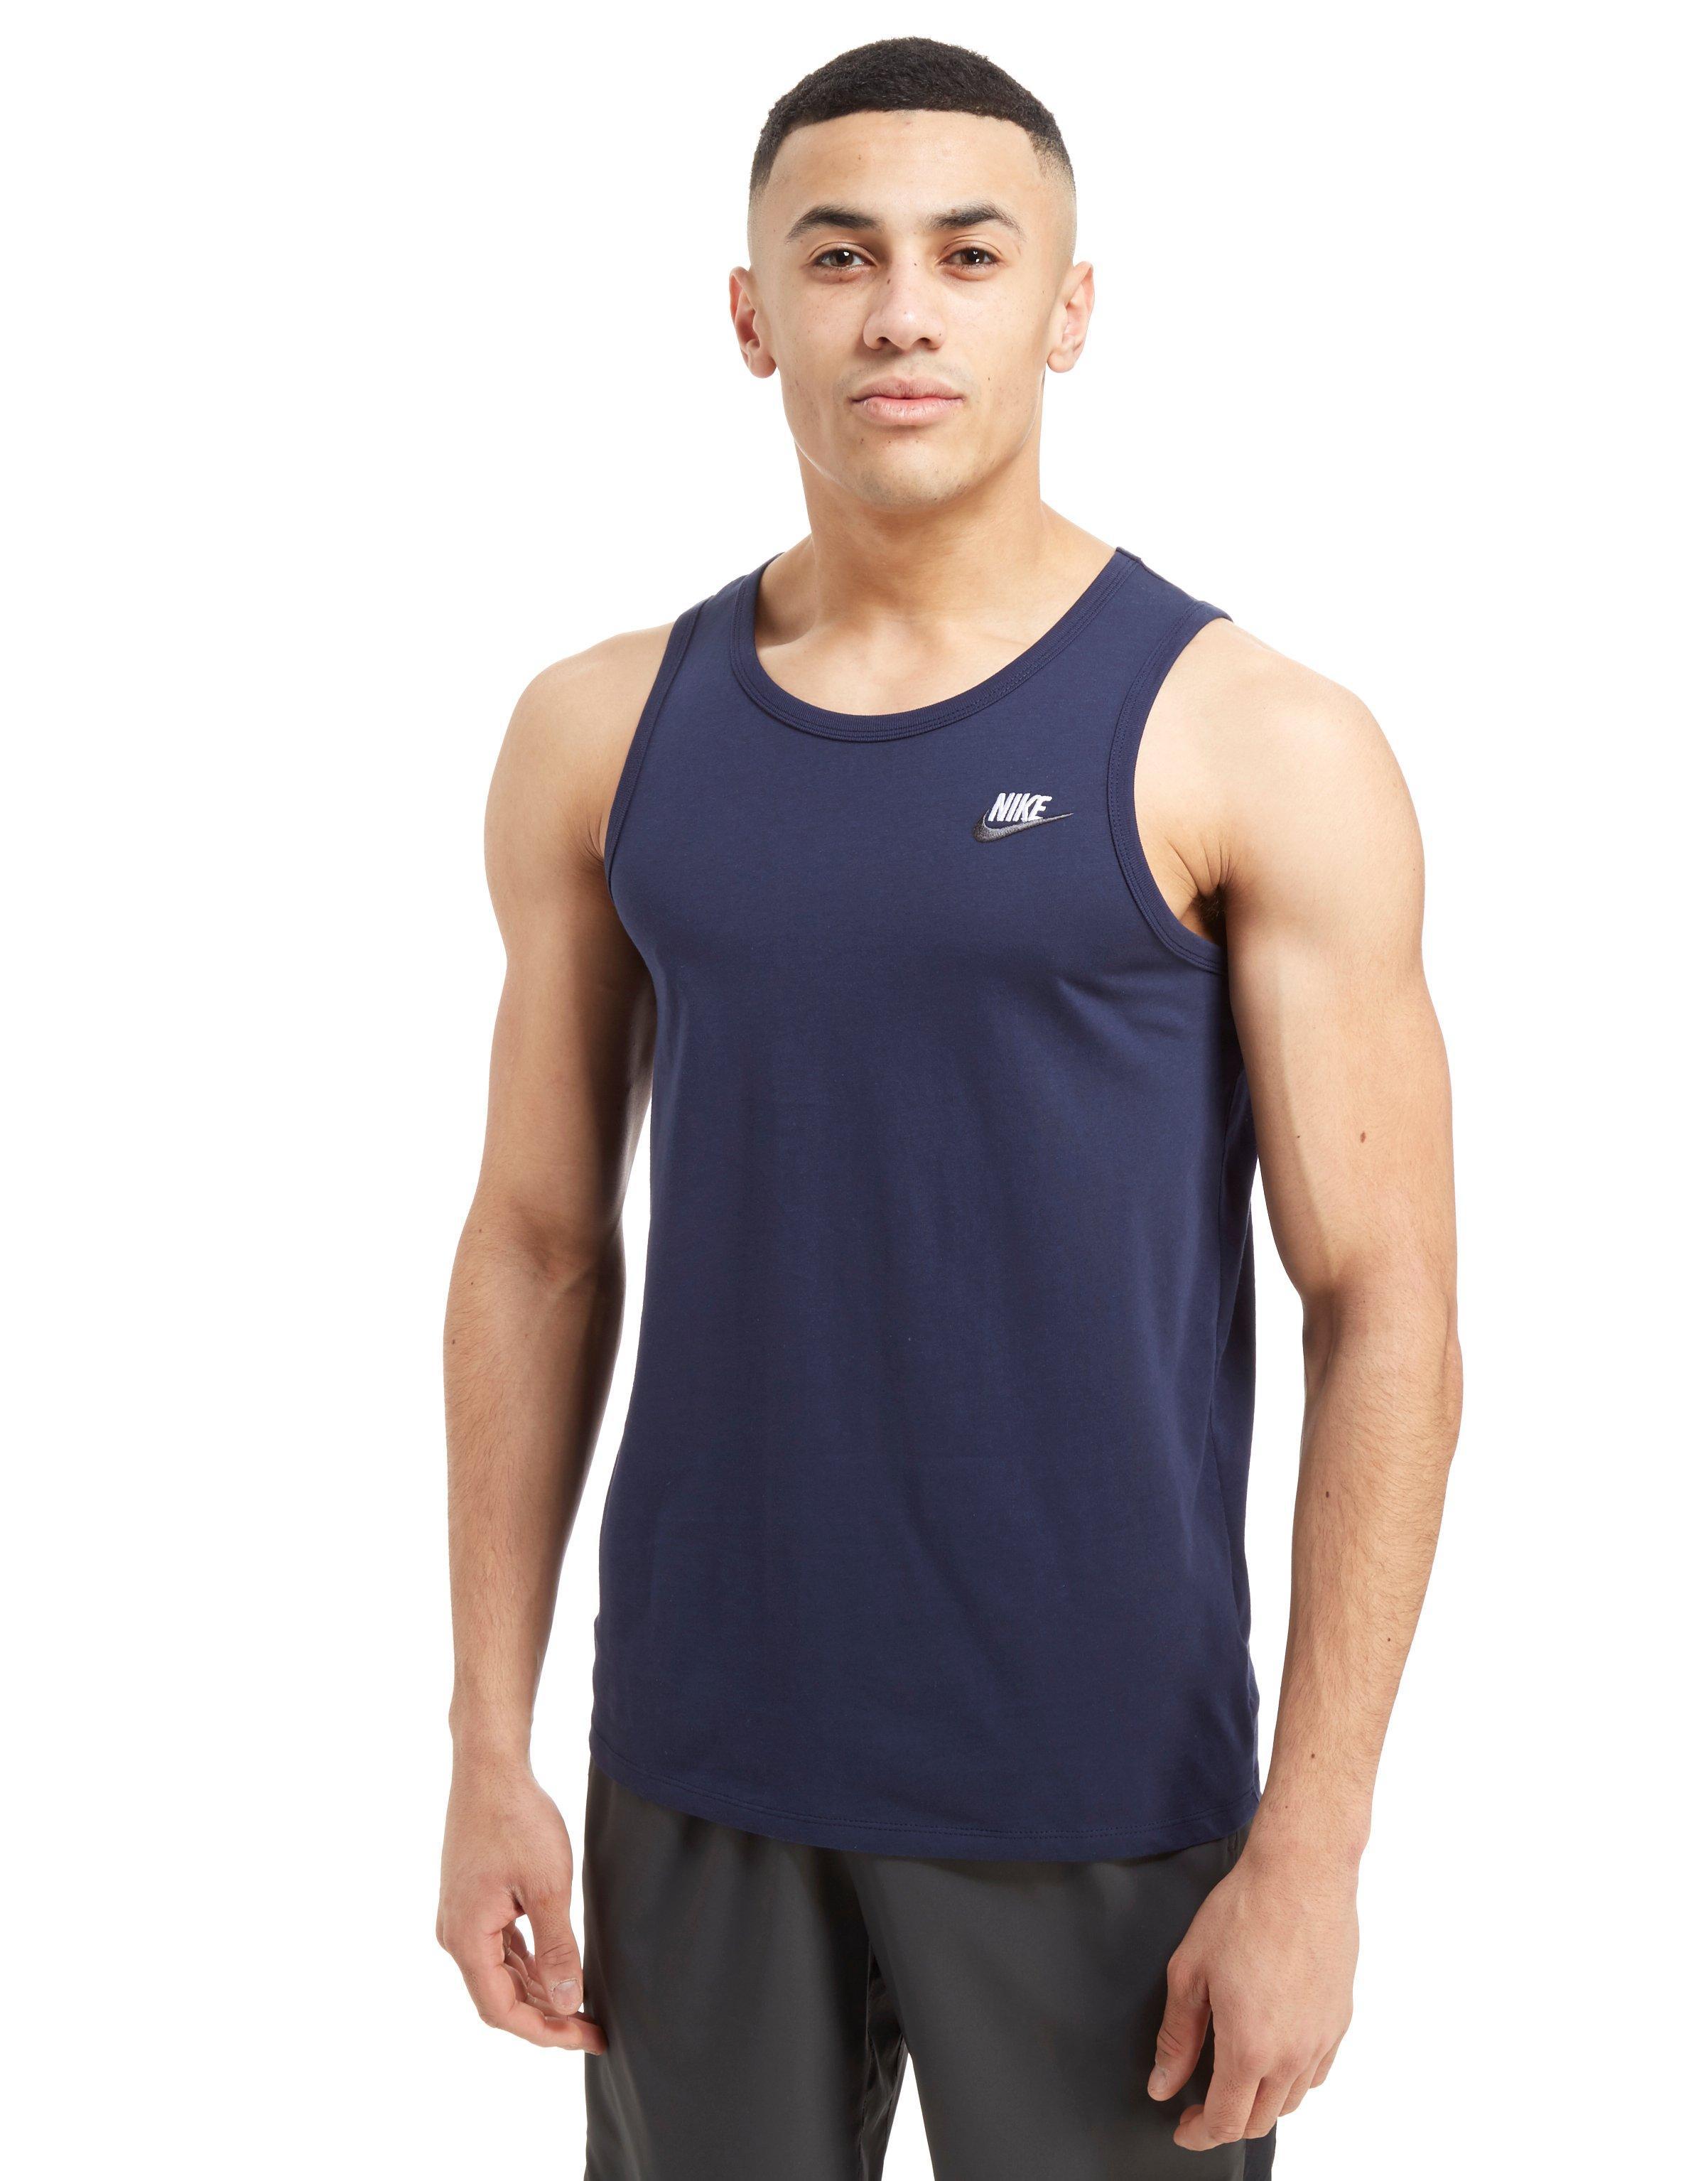 Nike Cotton Foundation Tank Top in Blue 